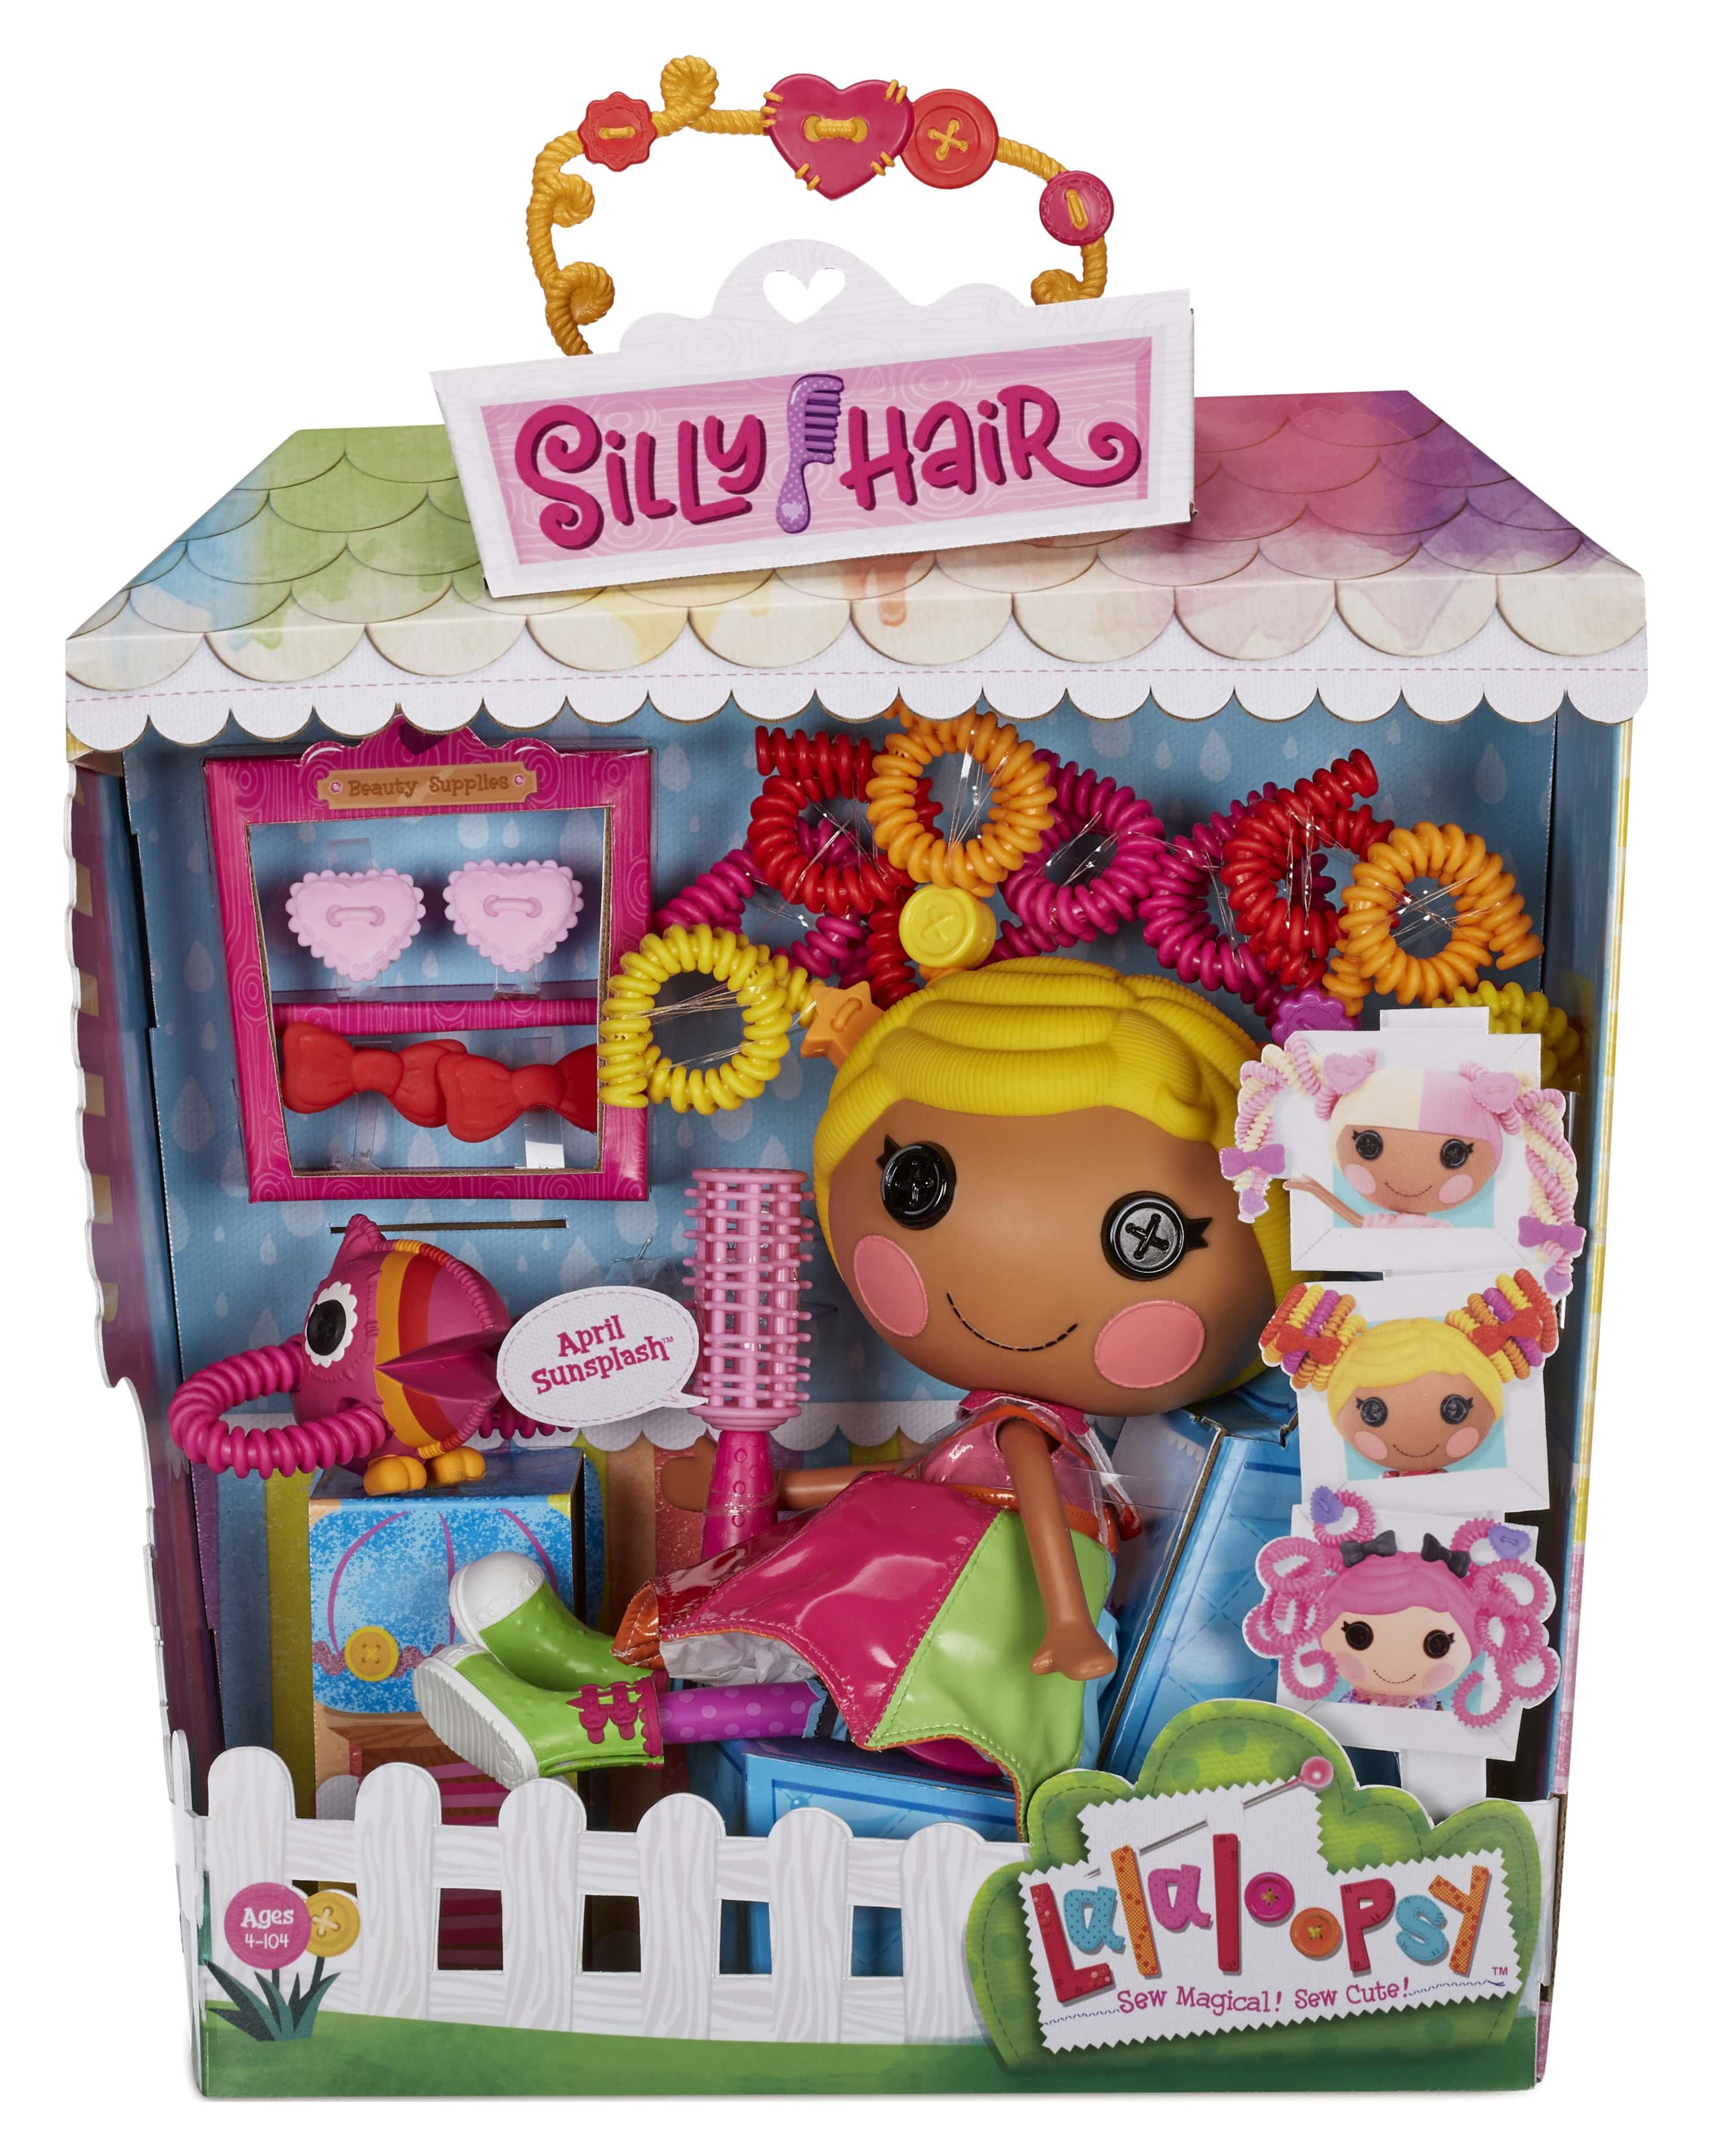 Lalaloopsy Silly Hair Doll - April Sunsplash with Pet Toucan, 13